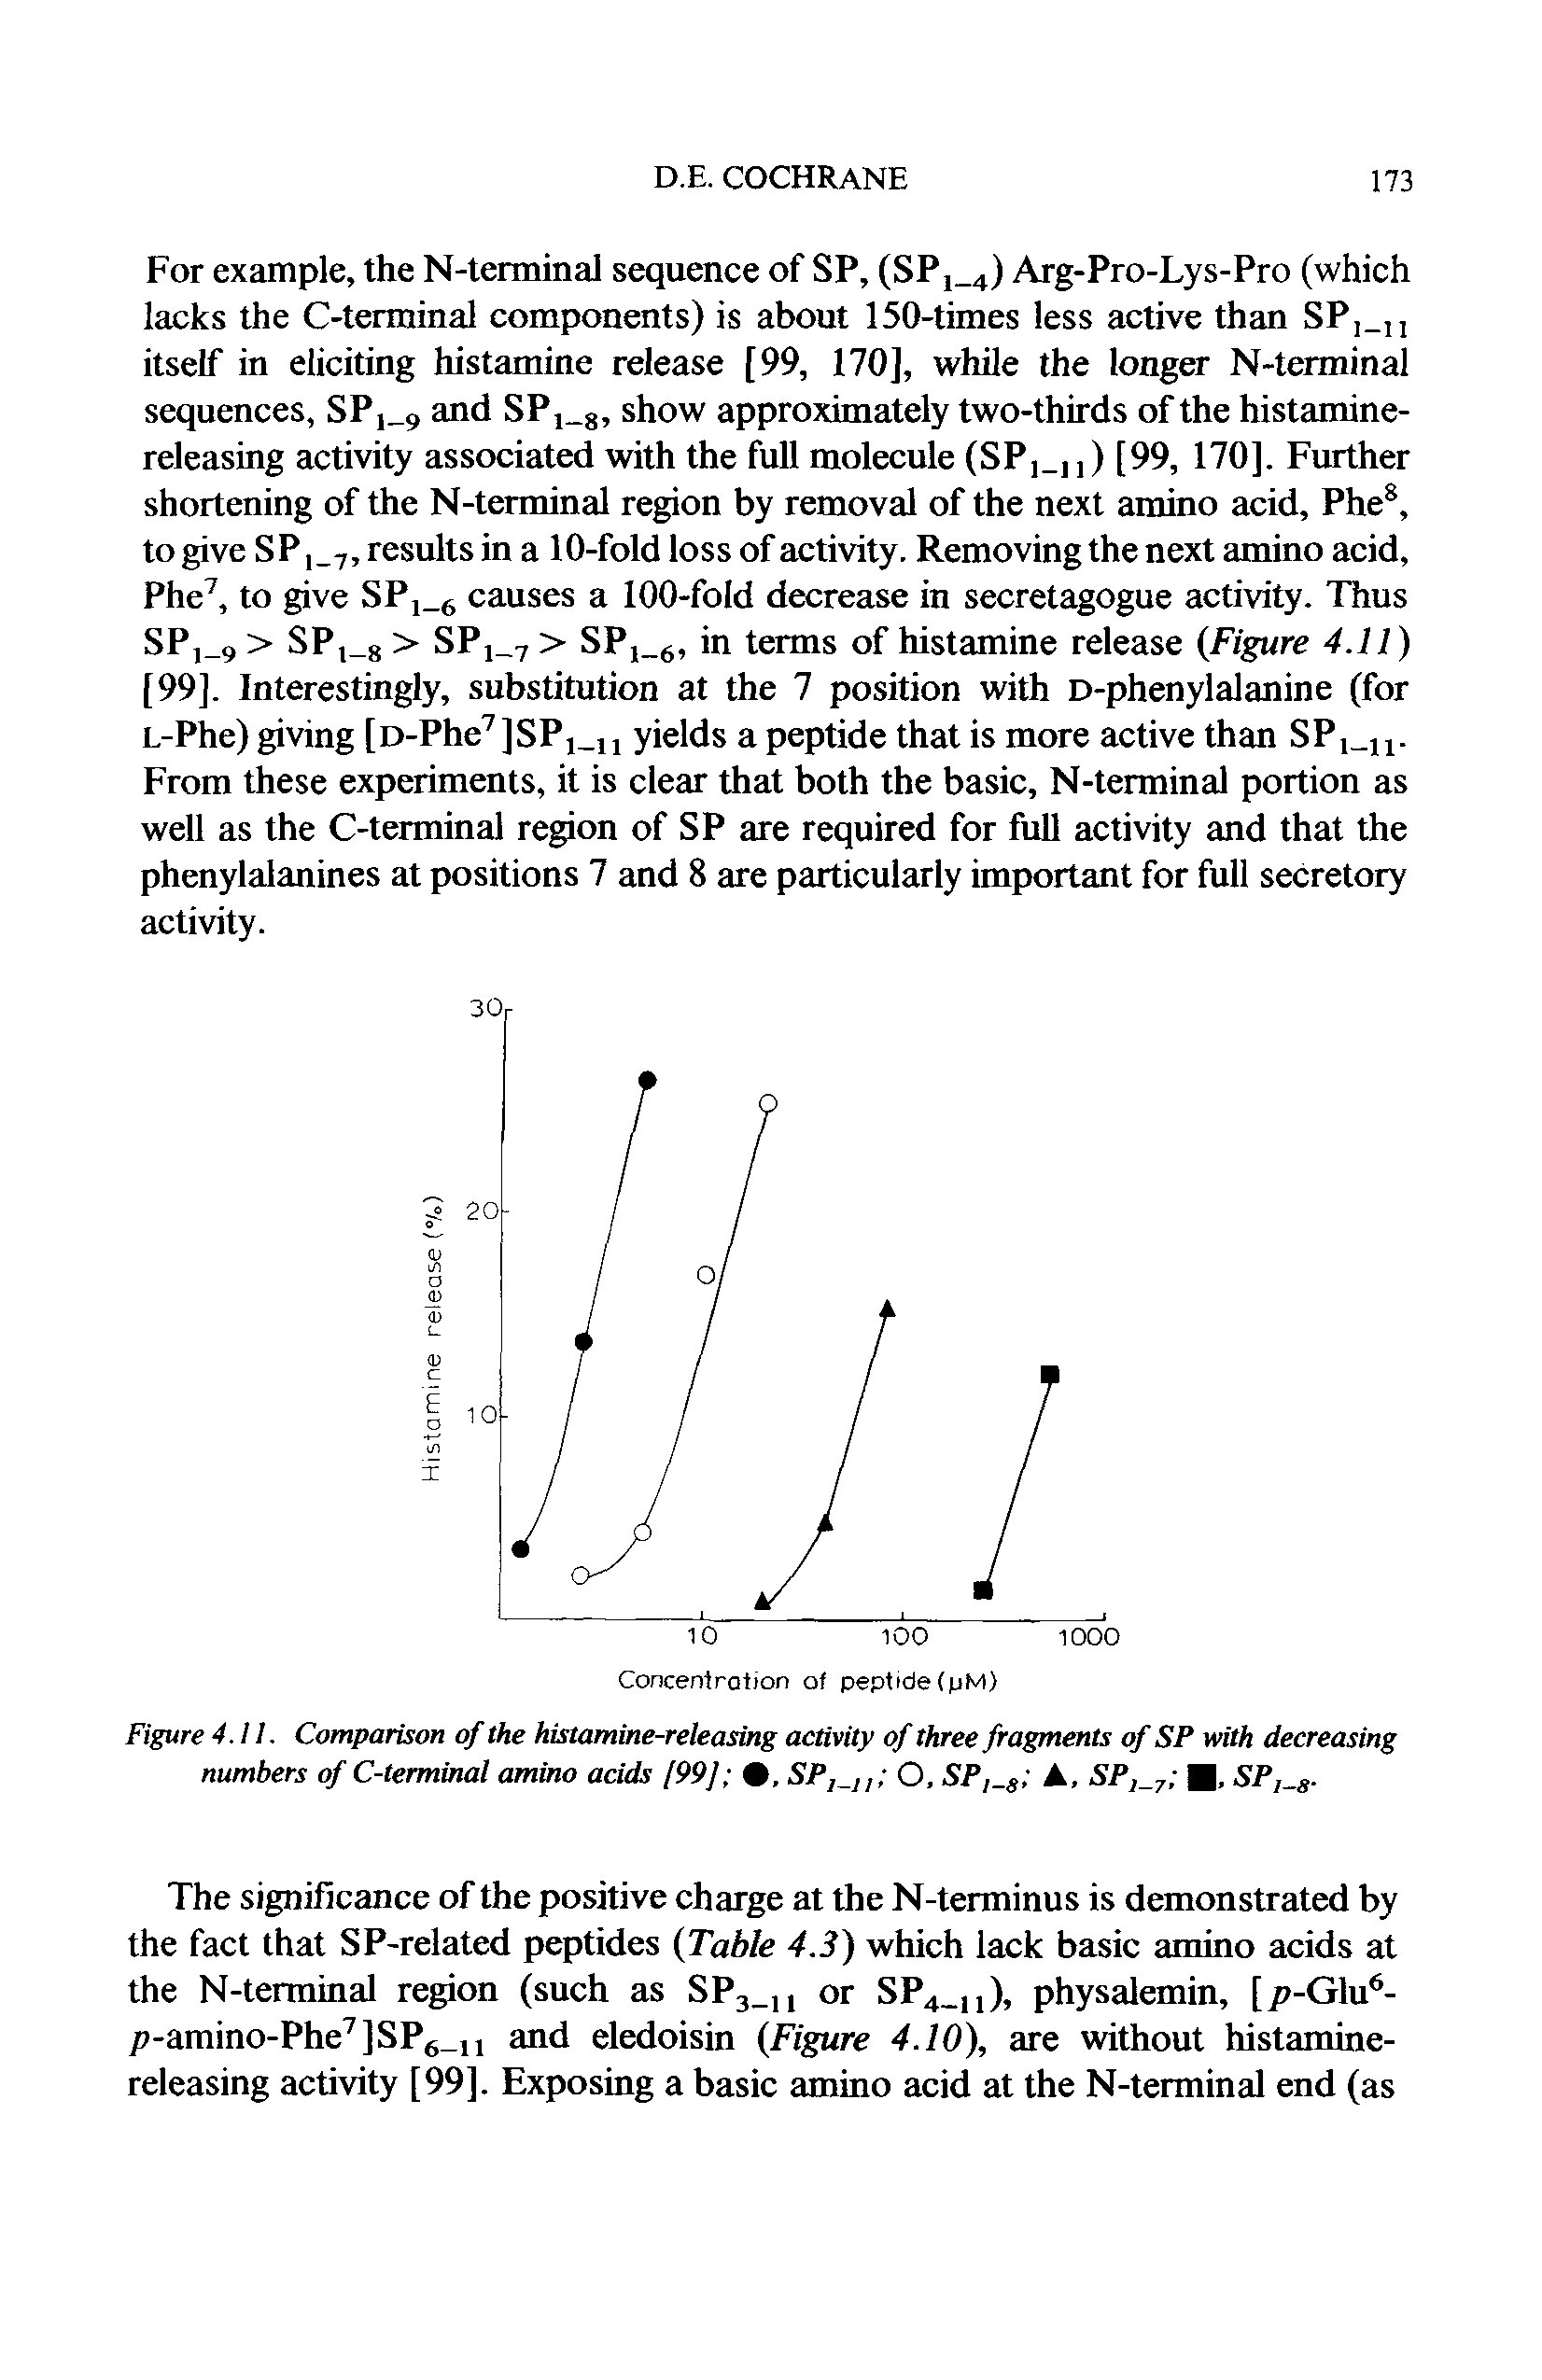 Figure 4.11. Comparison of the histamine-releasing activity of three fragments of SP with decreasing numbers of C-terminal amino acids 199] , SP, n O, SP, s A, SP, 7 , SP, s.